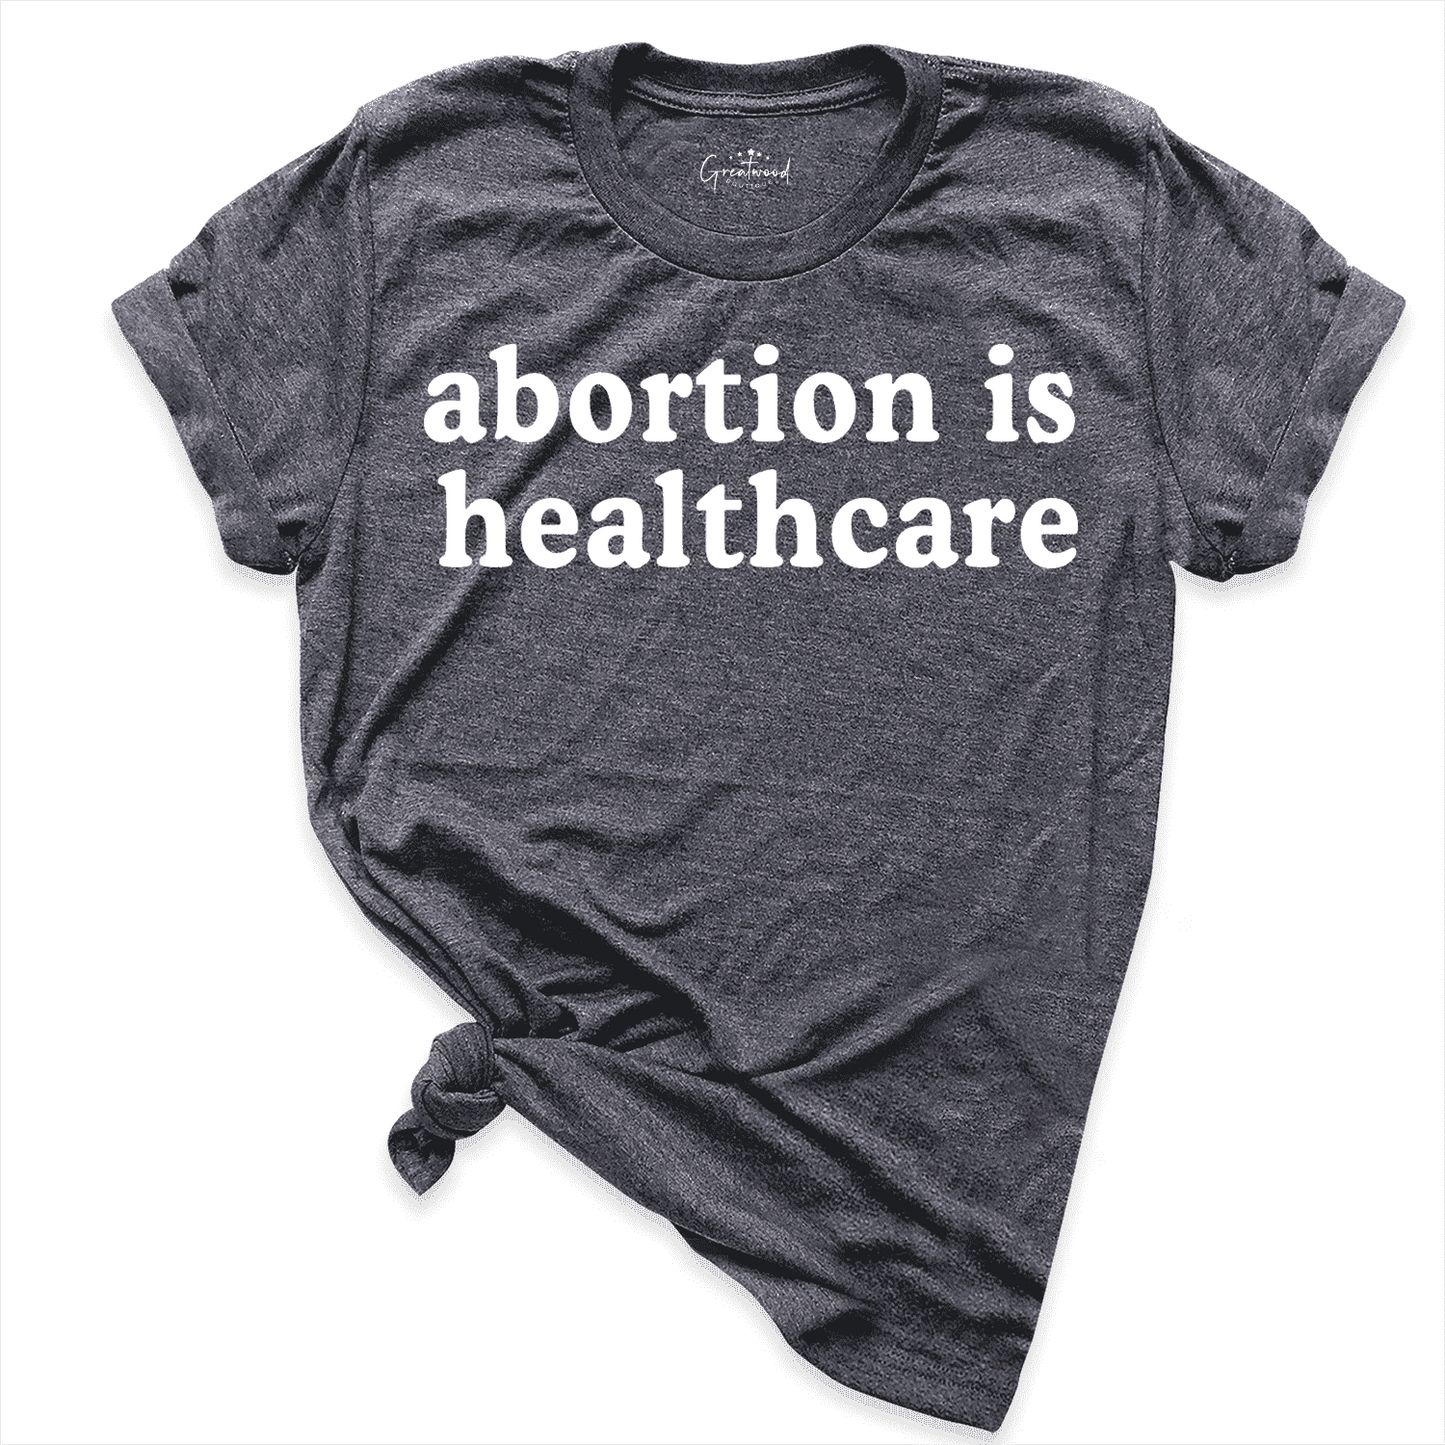 Abortion is Healthcare Shirt D.Grey - Greatwood Boutique